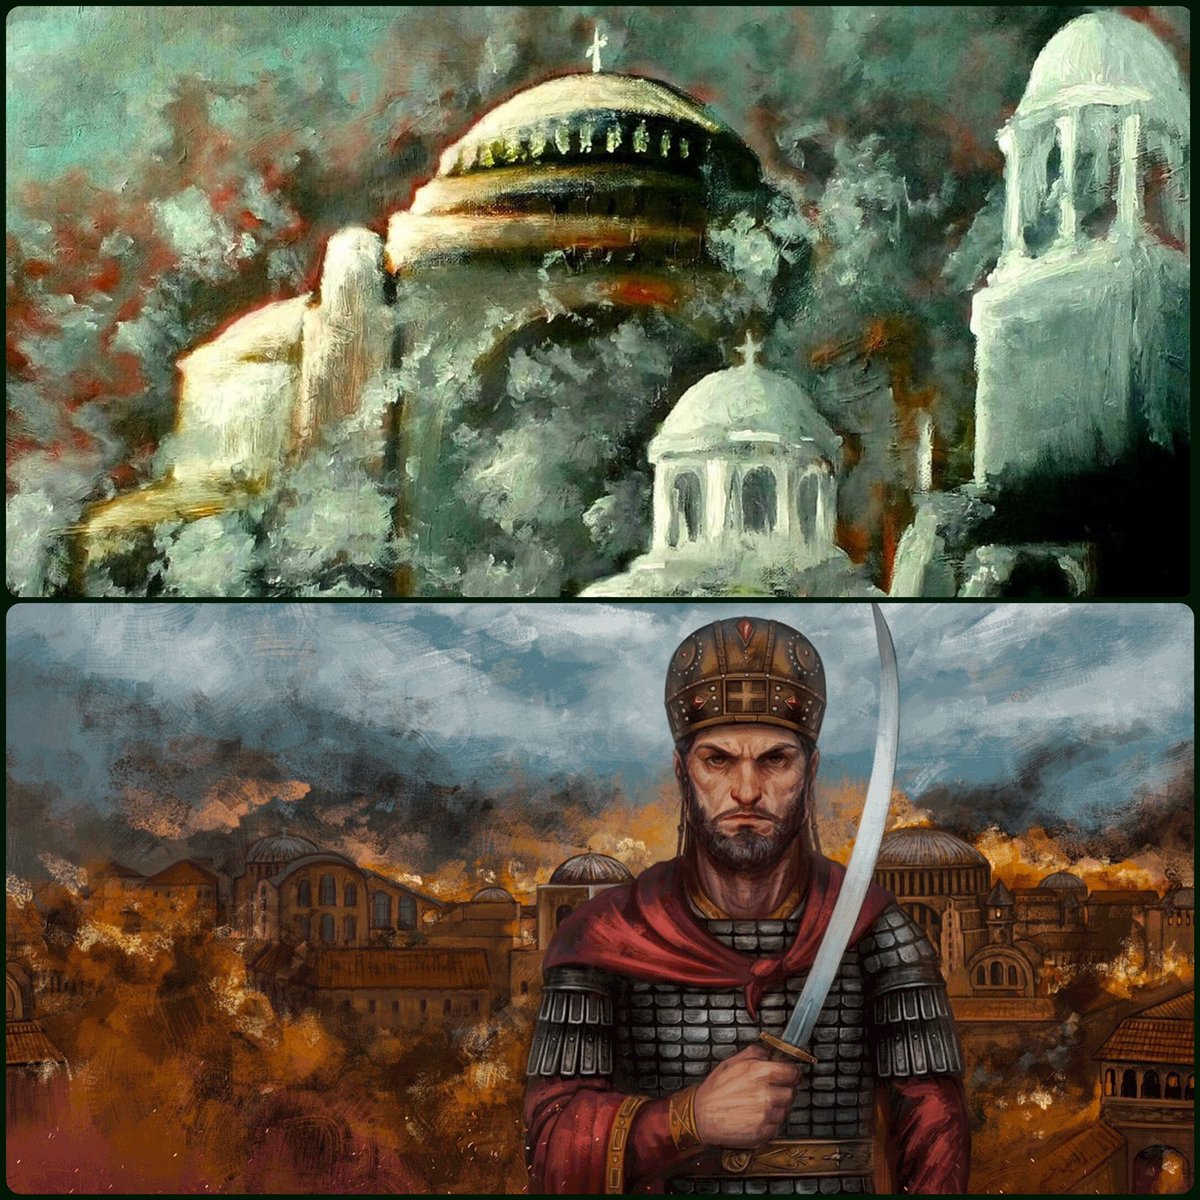 On May 29, 1453 the Ottomans were amassing - they were about to make history and be the first army to go through the Theodosian walls into the ancient capital of the Roman Empire.

The Romans feared this day would come!

Constantinople was about to fall, but not without a fight!